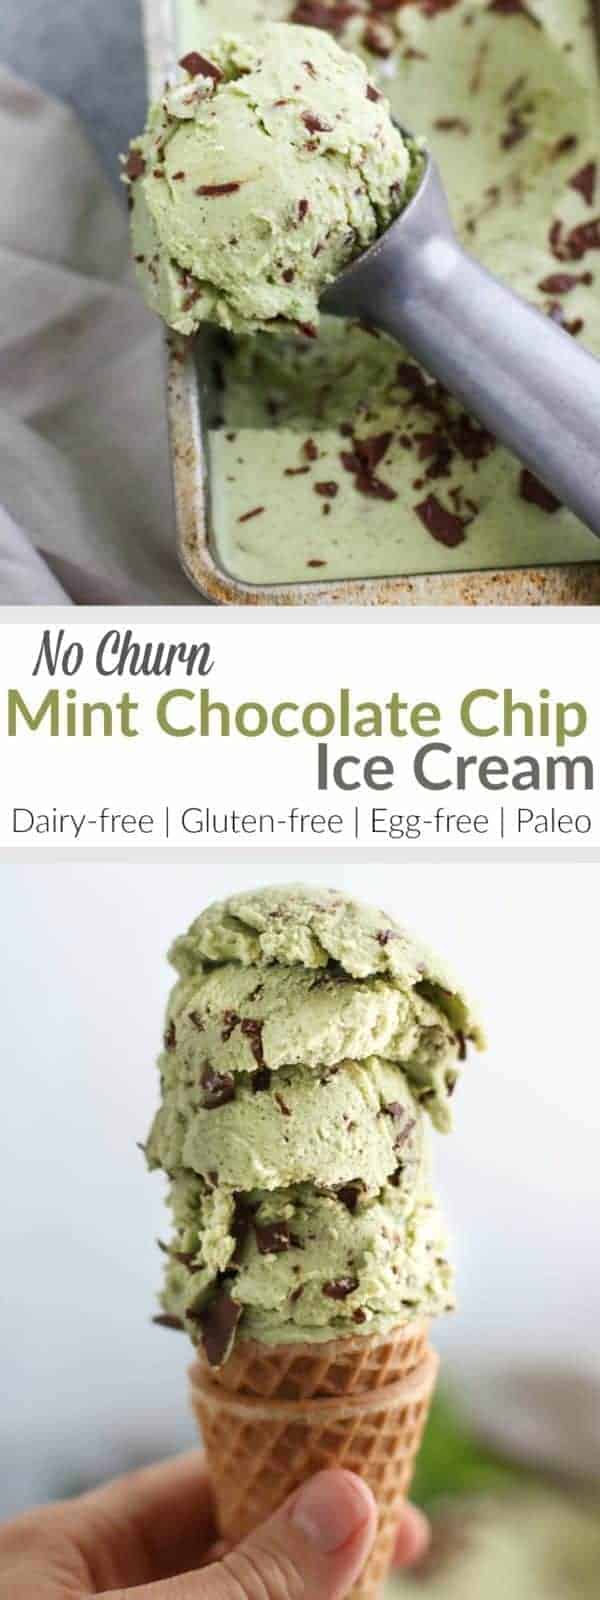 Pinterest image for Dairy-free Mint Chocolate Chip Ice Cream